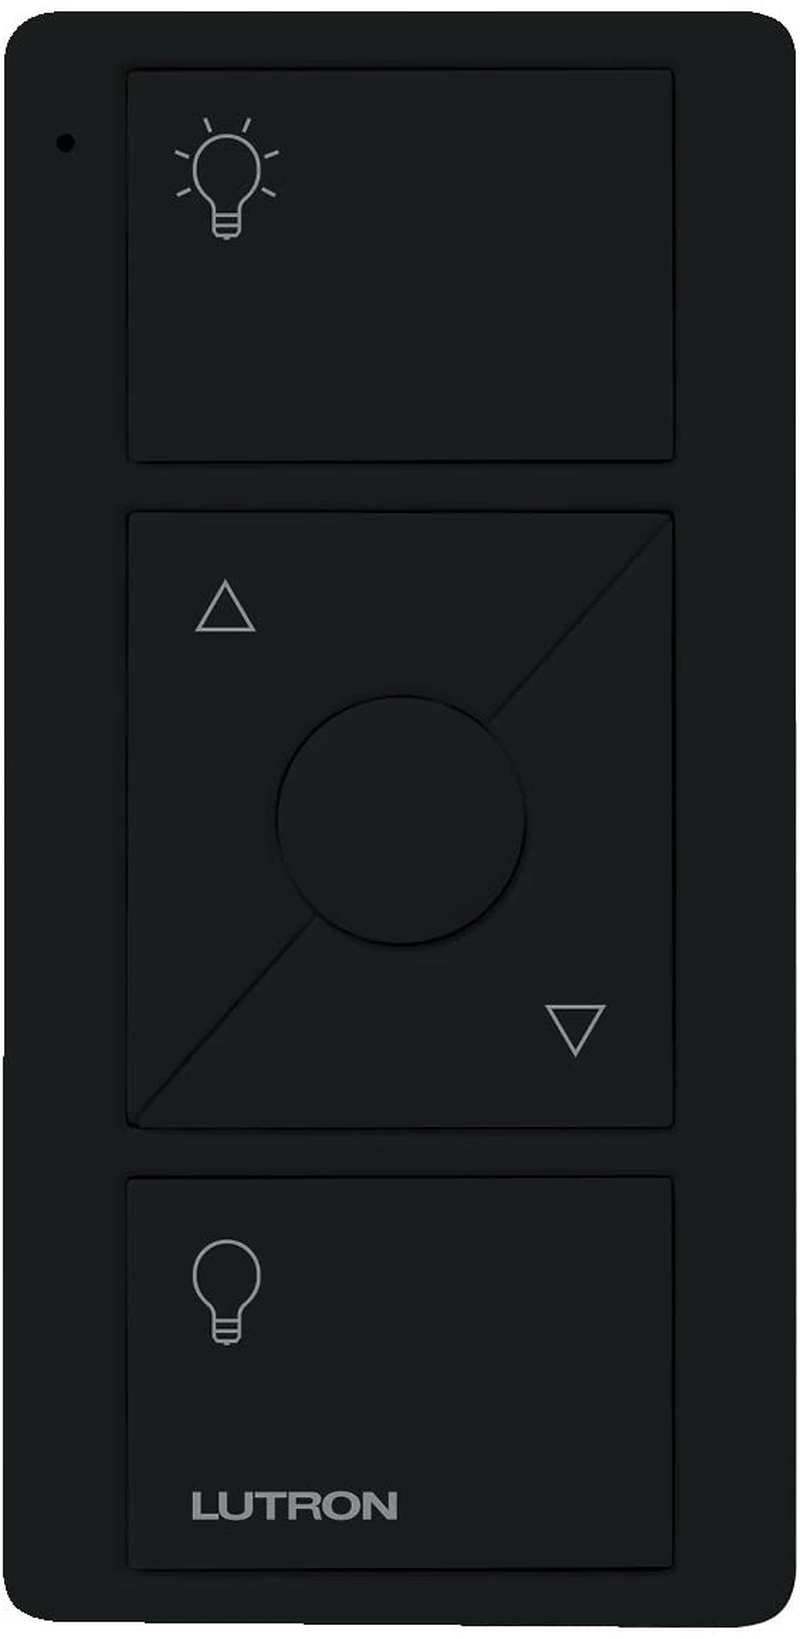 Lutron 3-Button with Raise/Lower Pico Remote for Caseta Wireless Smart Lighting Dimmer Switch, PJ2-3BRL-WH-L01R, White Animals & Pet Supplies > Pet Supplies > Dog Supplies > Dog Houses Lutron Black  